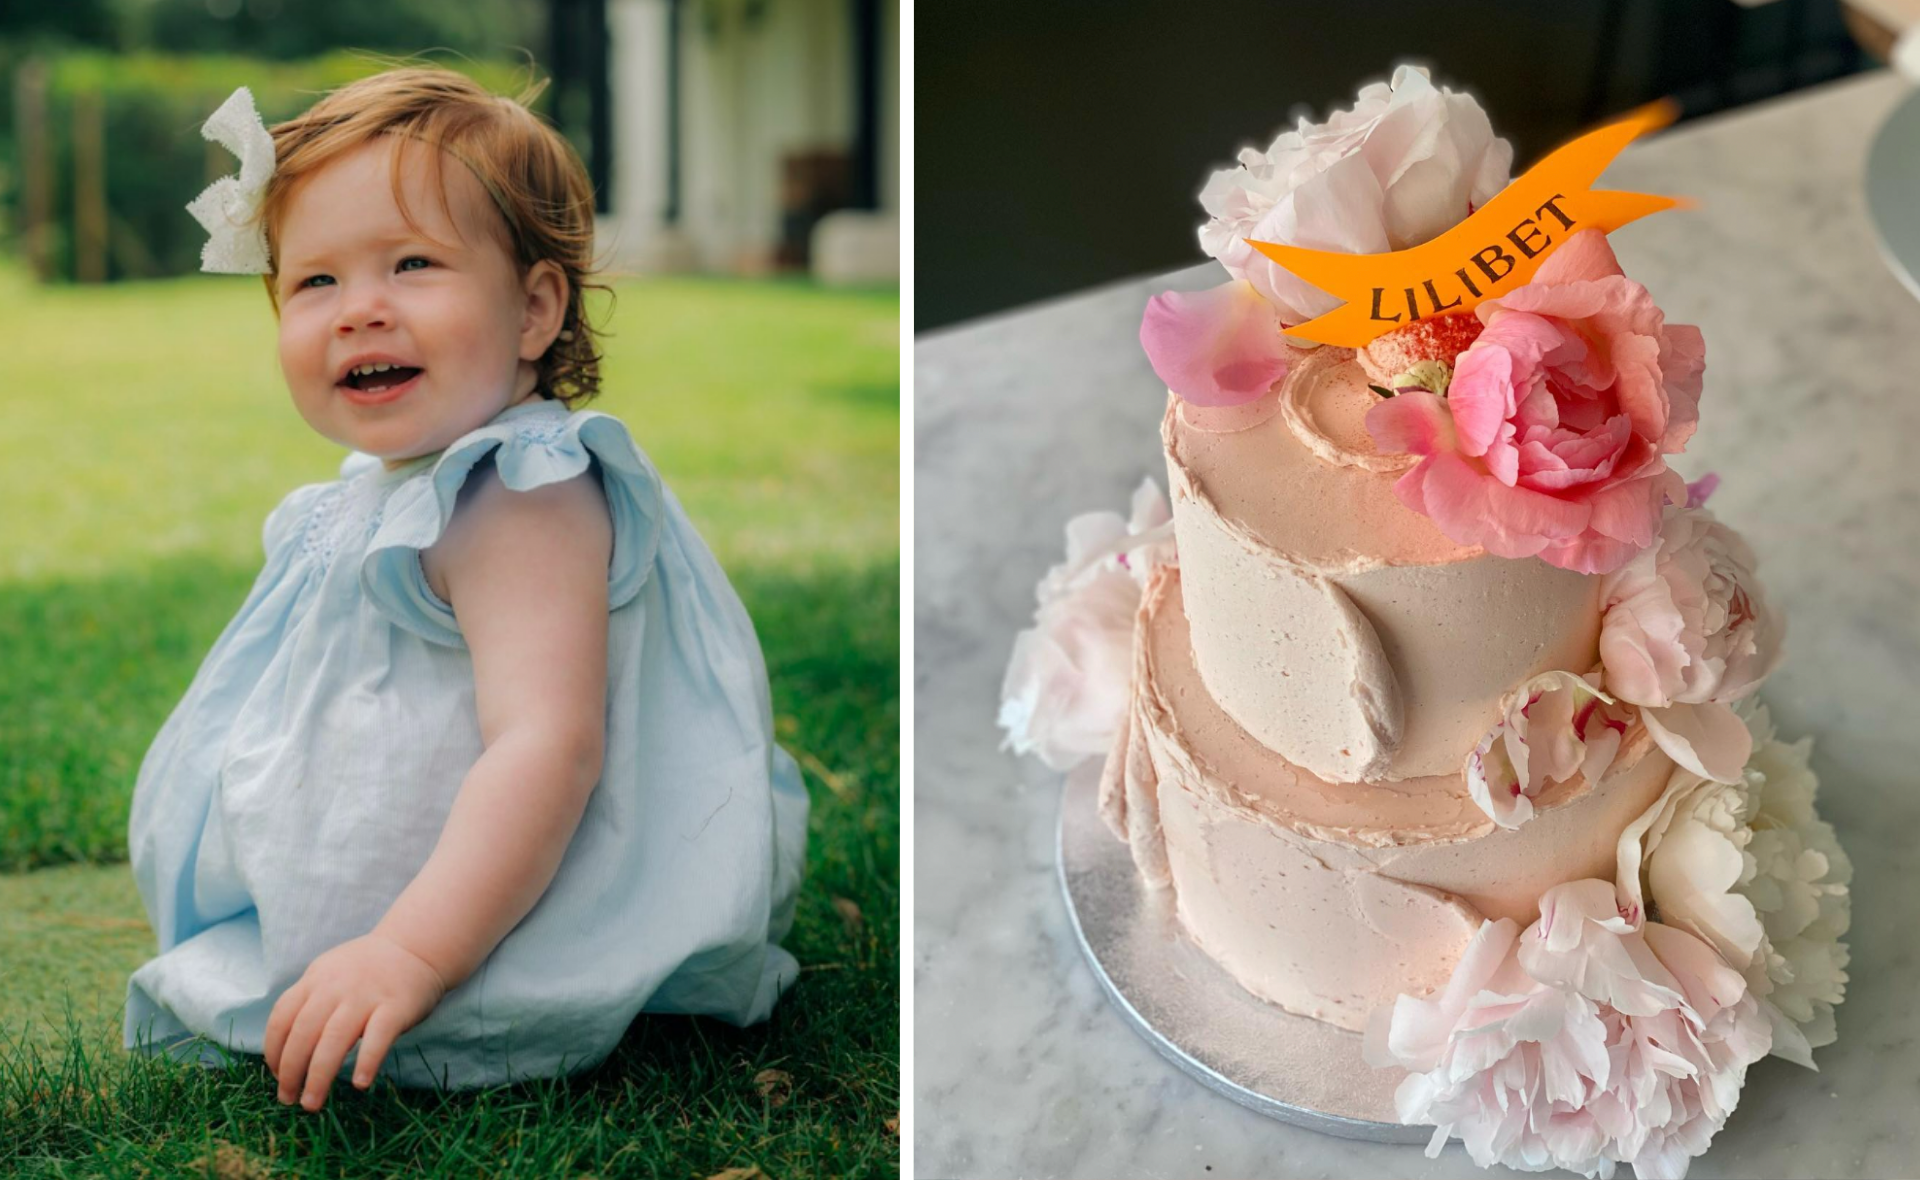 Lilibet’s first birthday cake featured a special nod to Prince Harry and Meghan, Duchess of Sussex’s wedding day